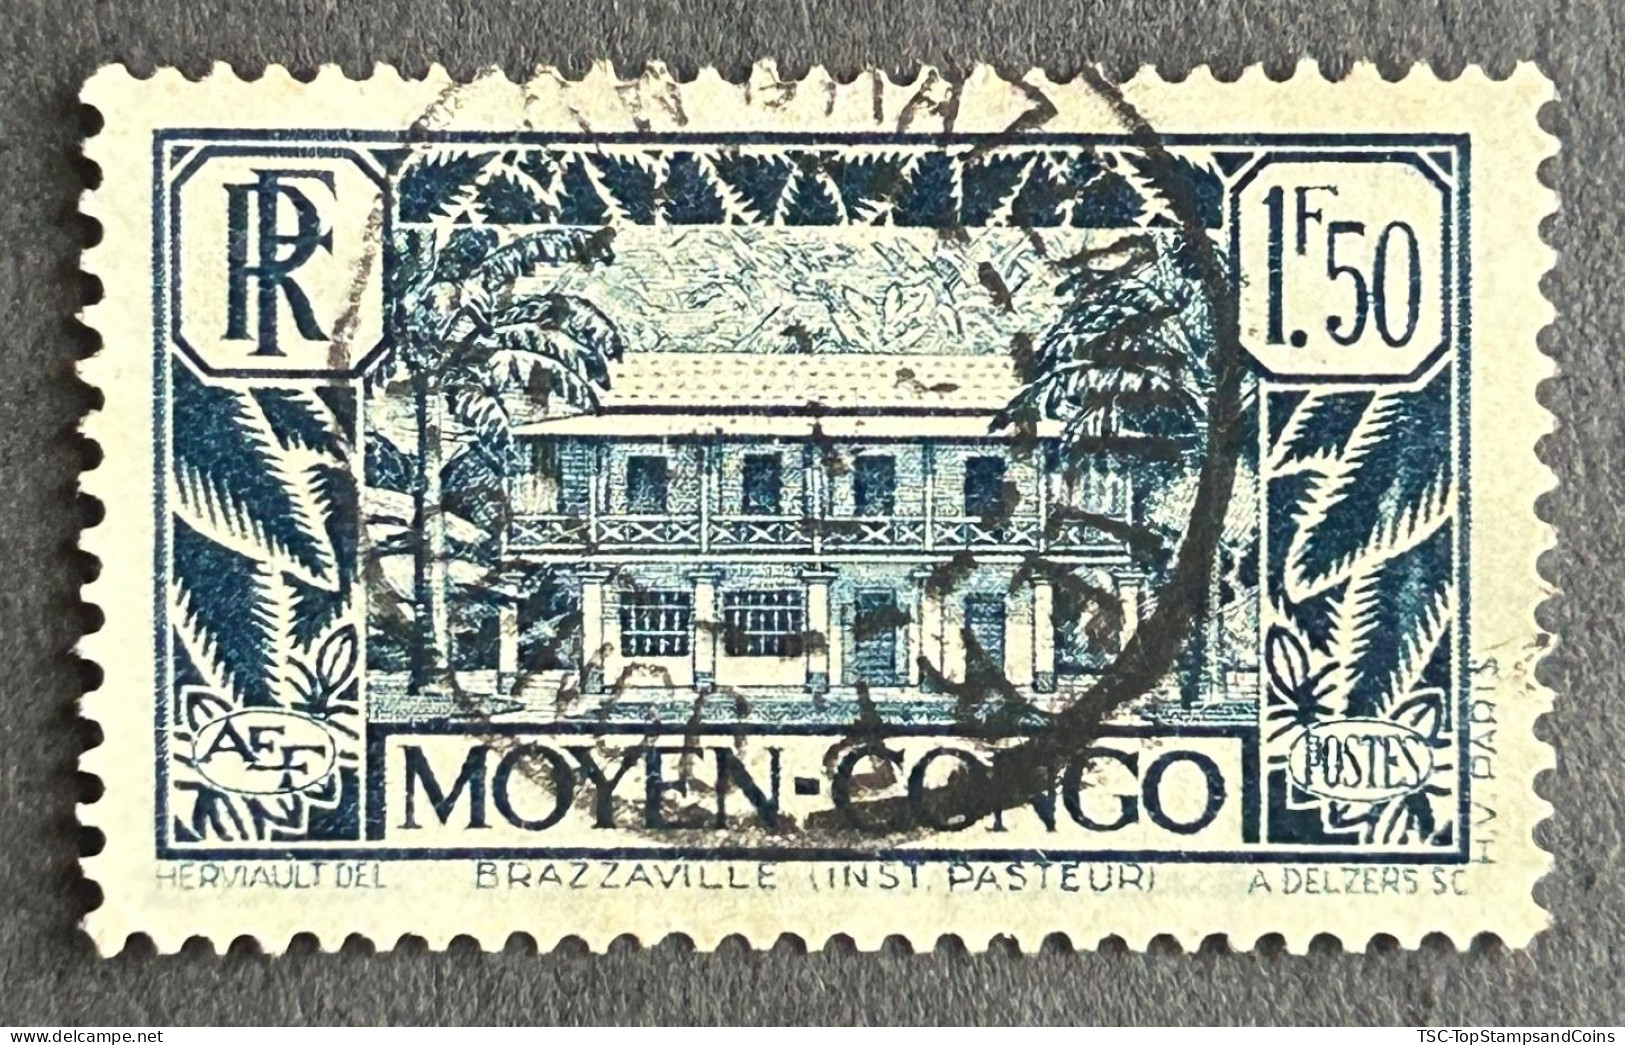 FRCG129U2 - Brazzaville - Pasteur Institute - 1.50 F Used Stamp - Middle Congo - 1933 - Used Stamps